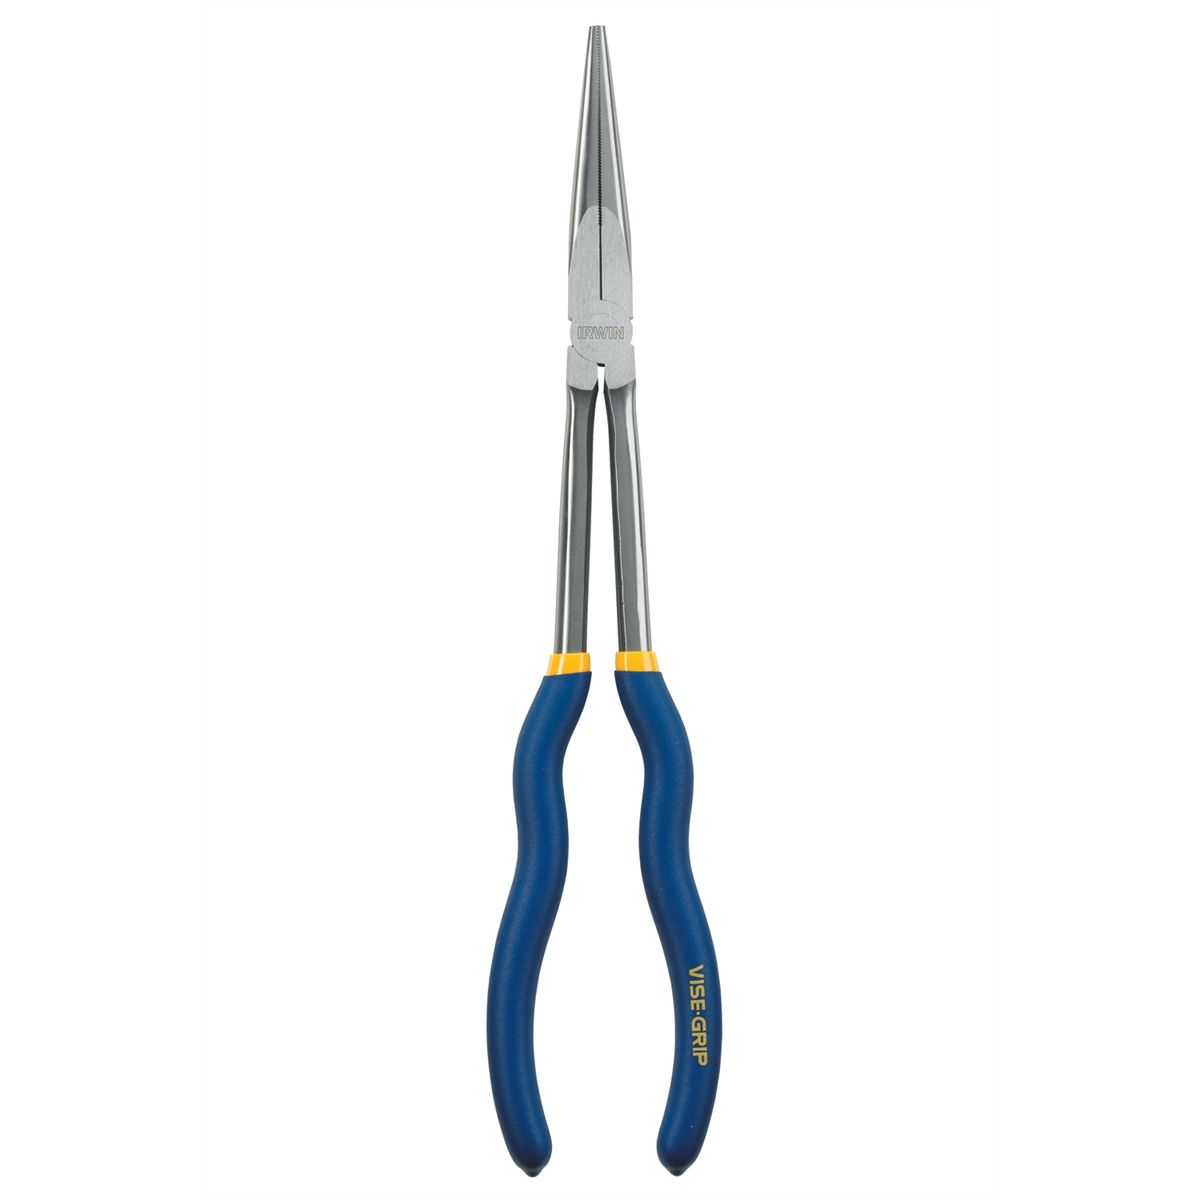 IRWIN Vise-Grip 11-in Electrical Needle Nose Pliers at